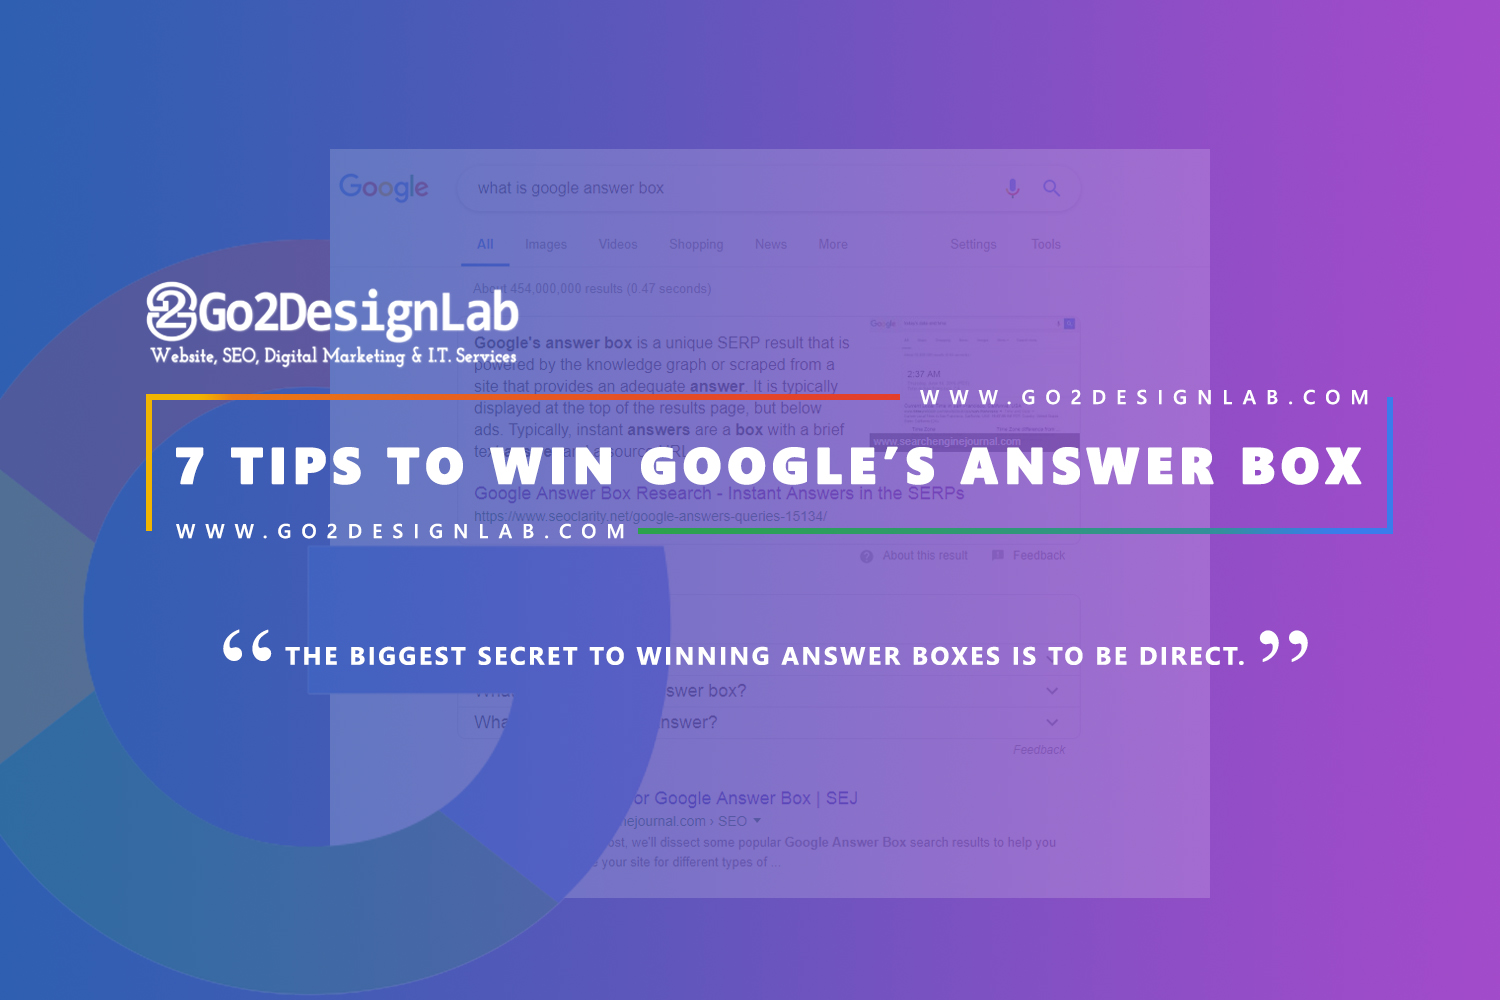 7 Tips To Win Google’s Answer Box